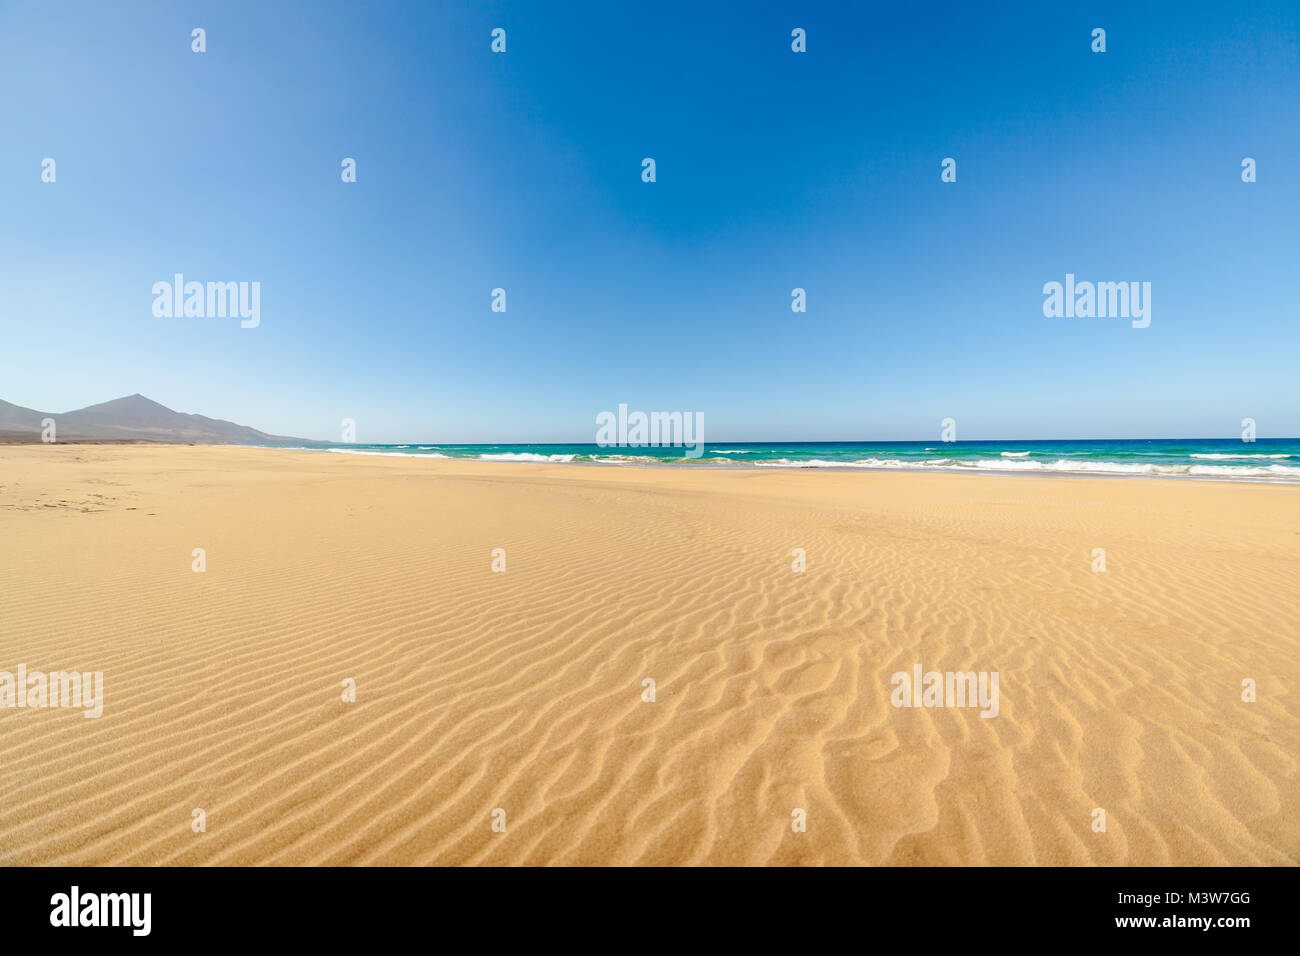 Cofete beach, Fuerteventura, Canary Islands, Spain. Amazing Cofete beach with endless horizon. Volcanic hills in the background and Atlantic Ocean. Stock Photo